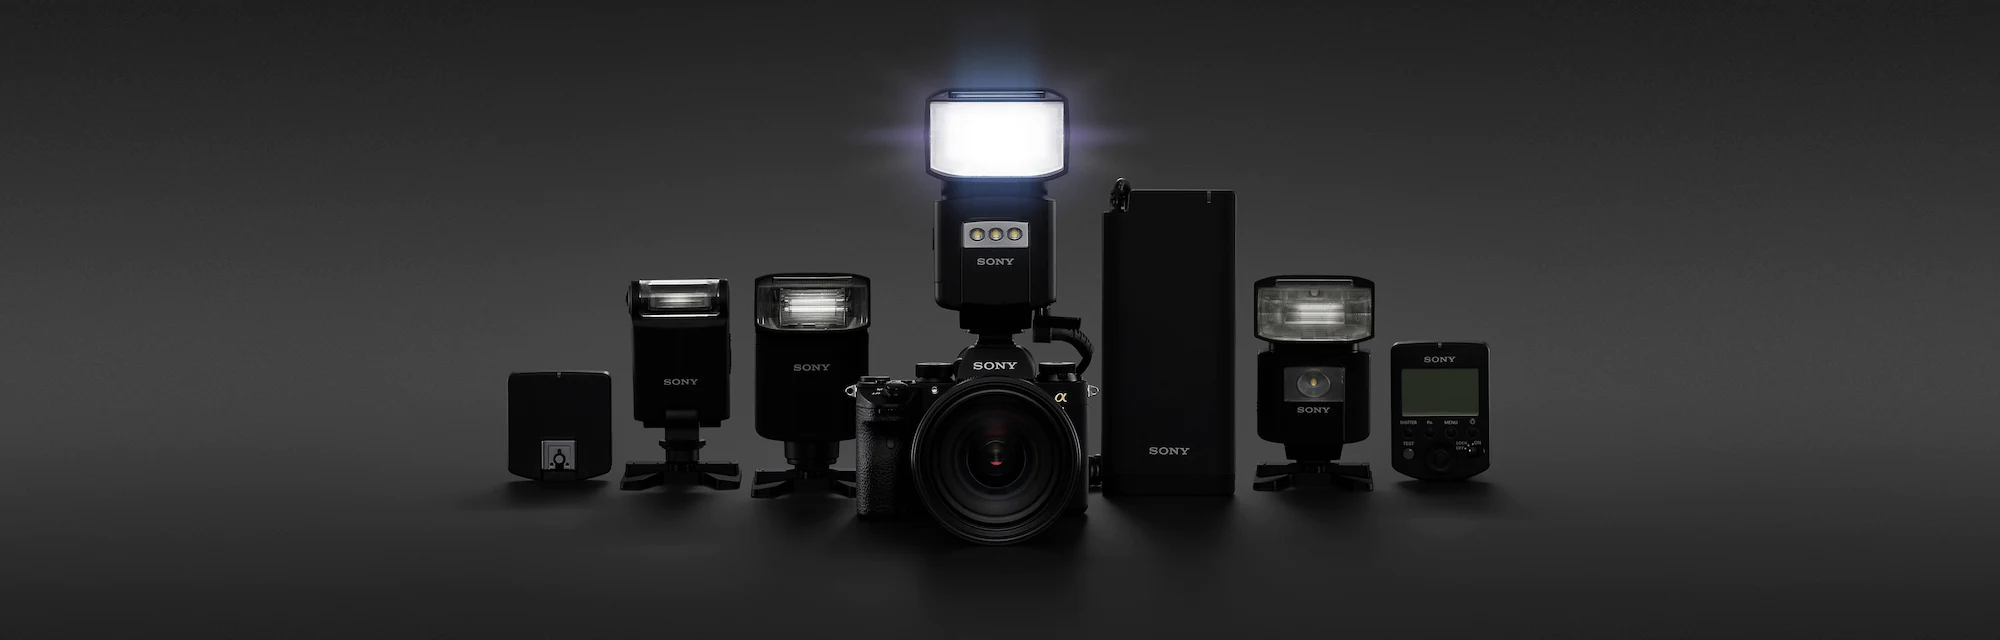 Level up your photography with Sony flash